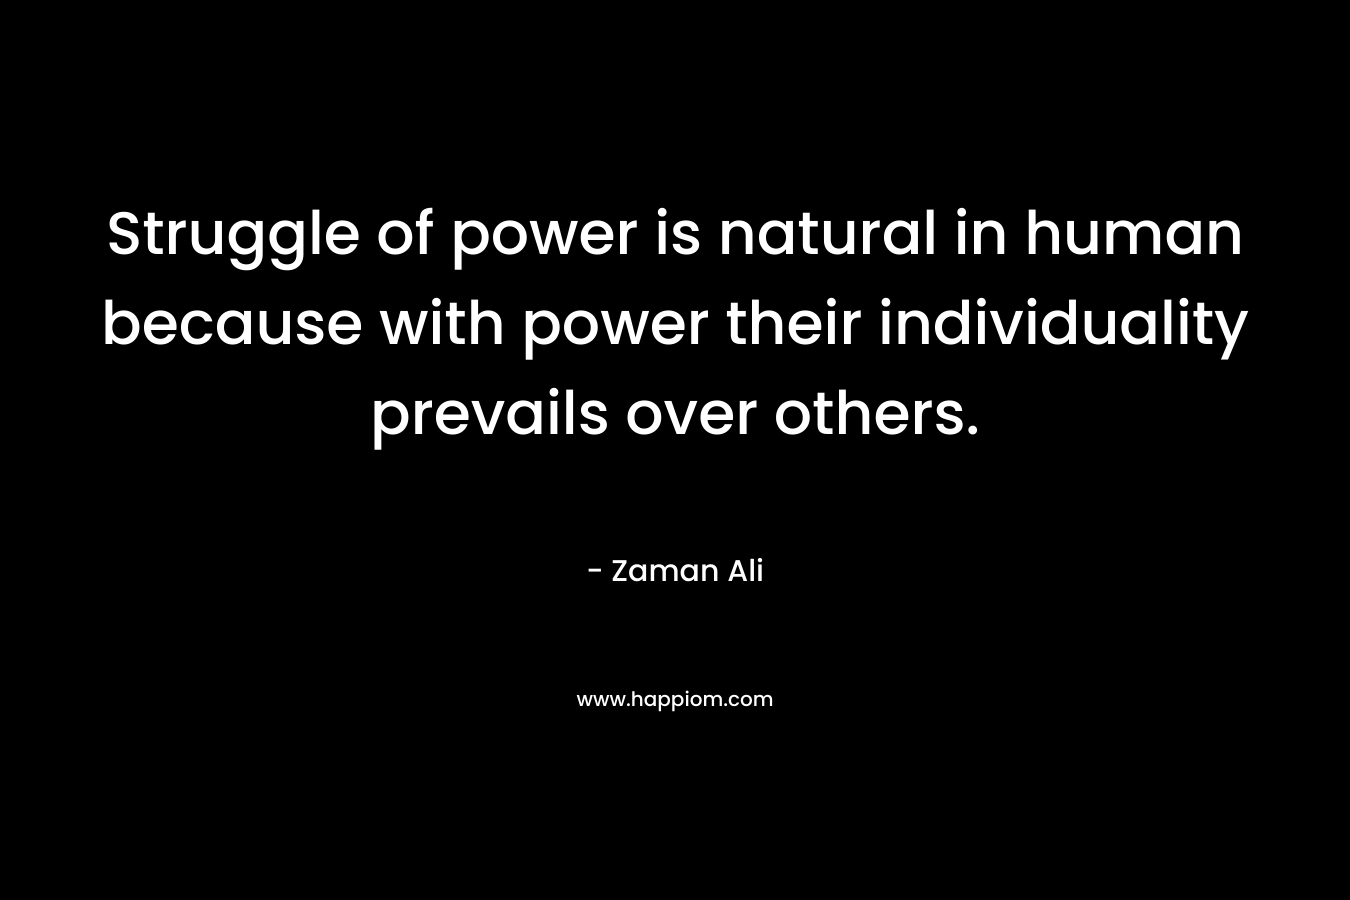 Struggle of power is natural in human because with power their individuality prevails over others. – Zaman Ali